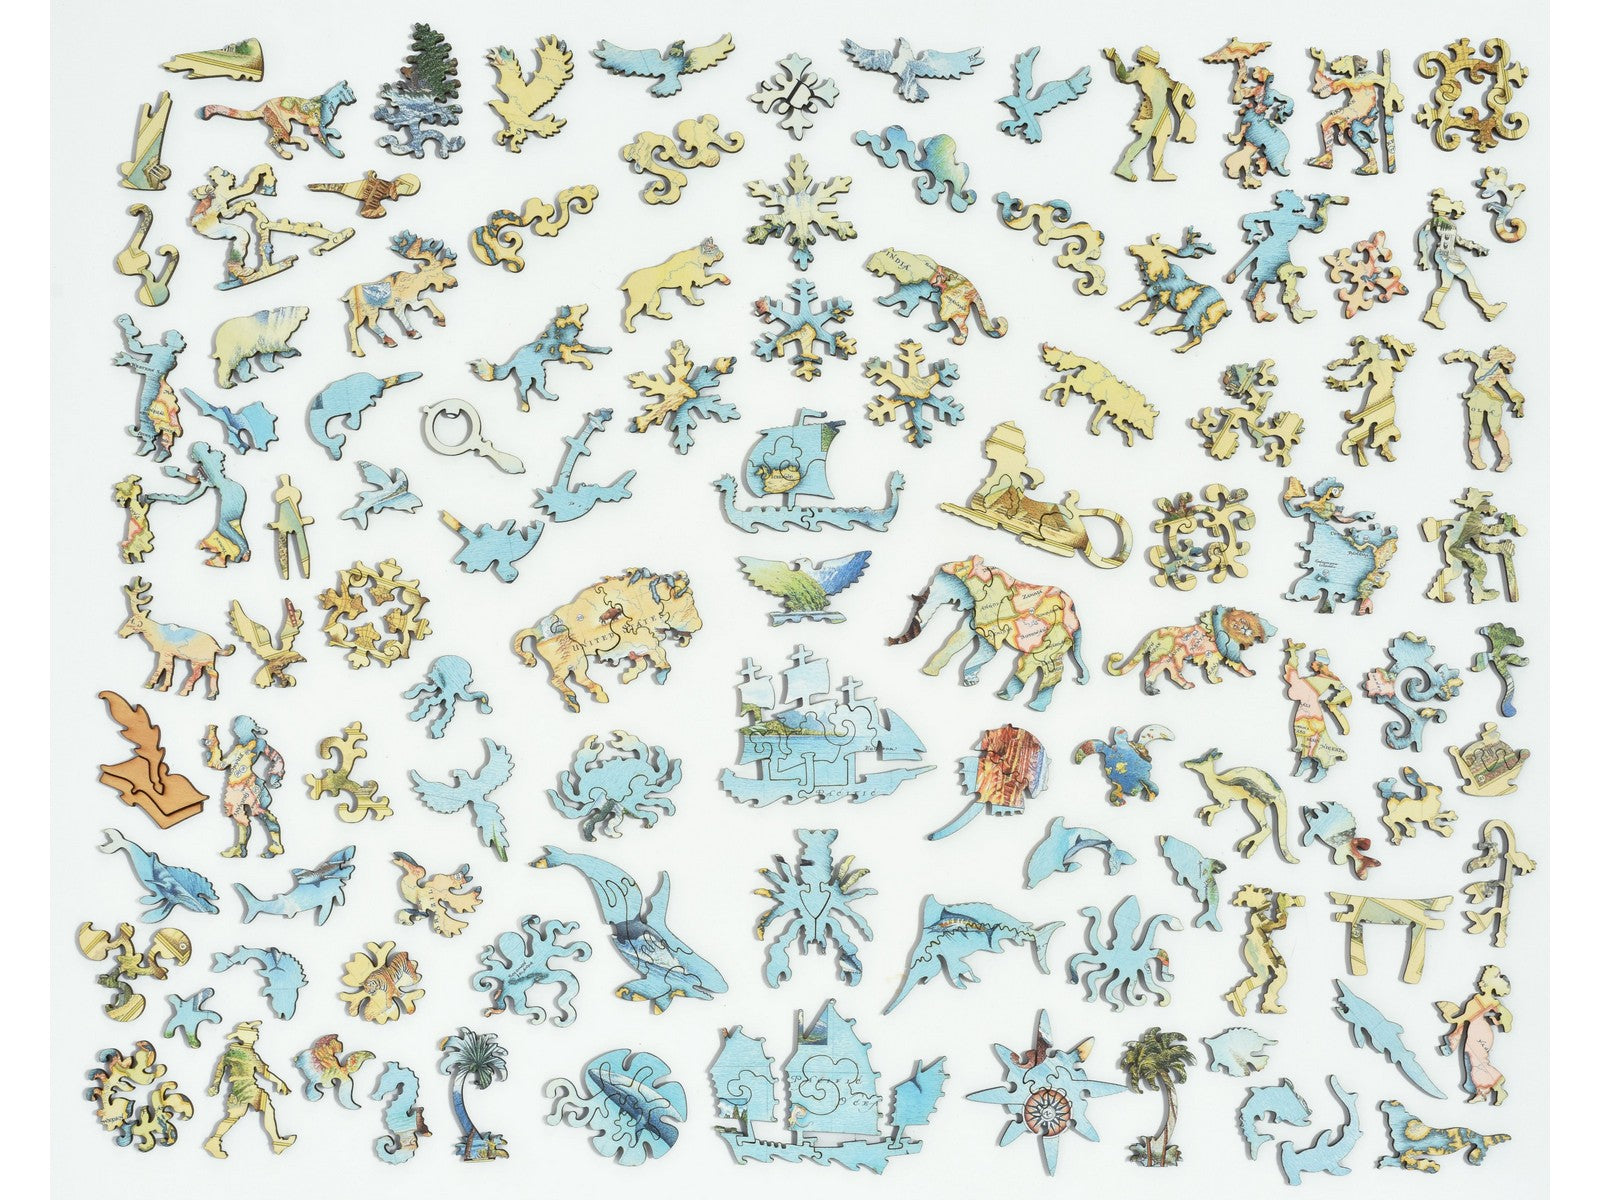 The whimsy pieces that can be found in the puzzle, The World Map.